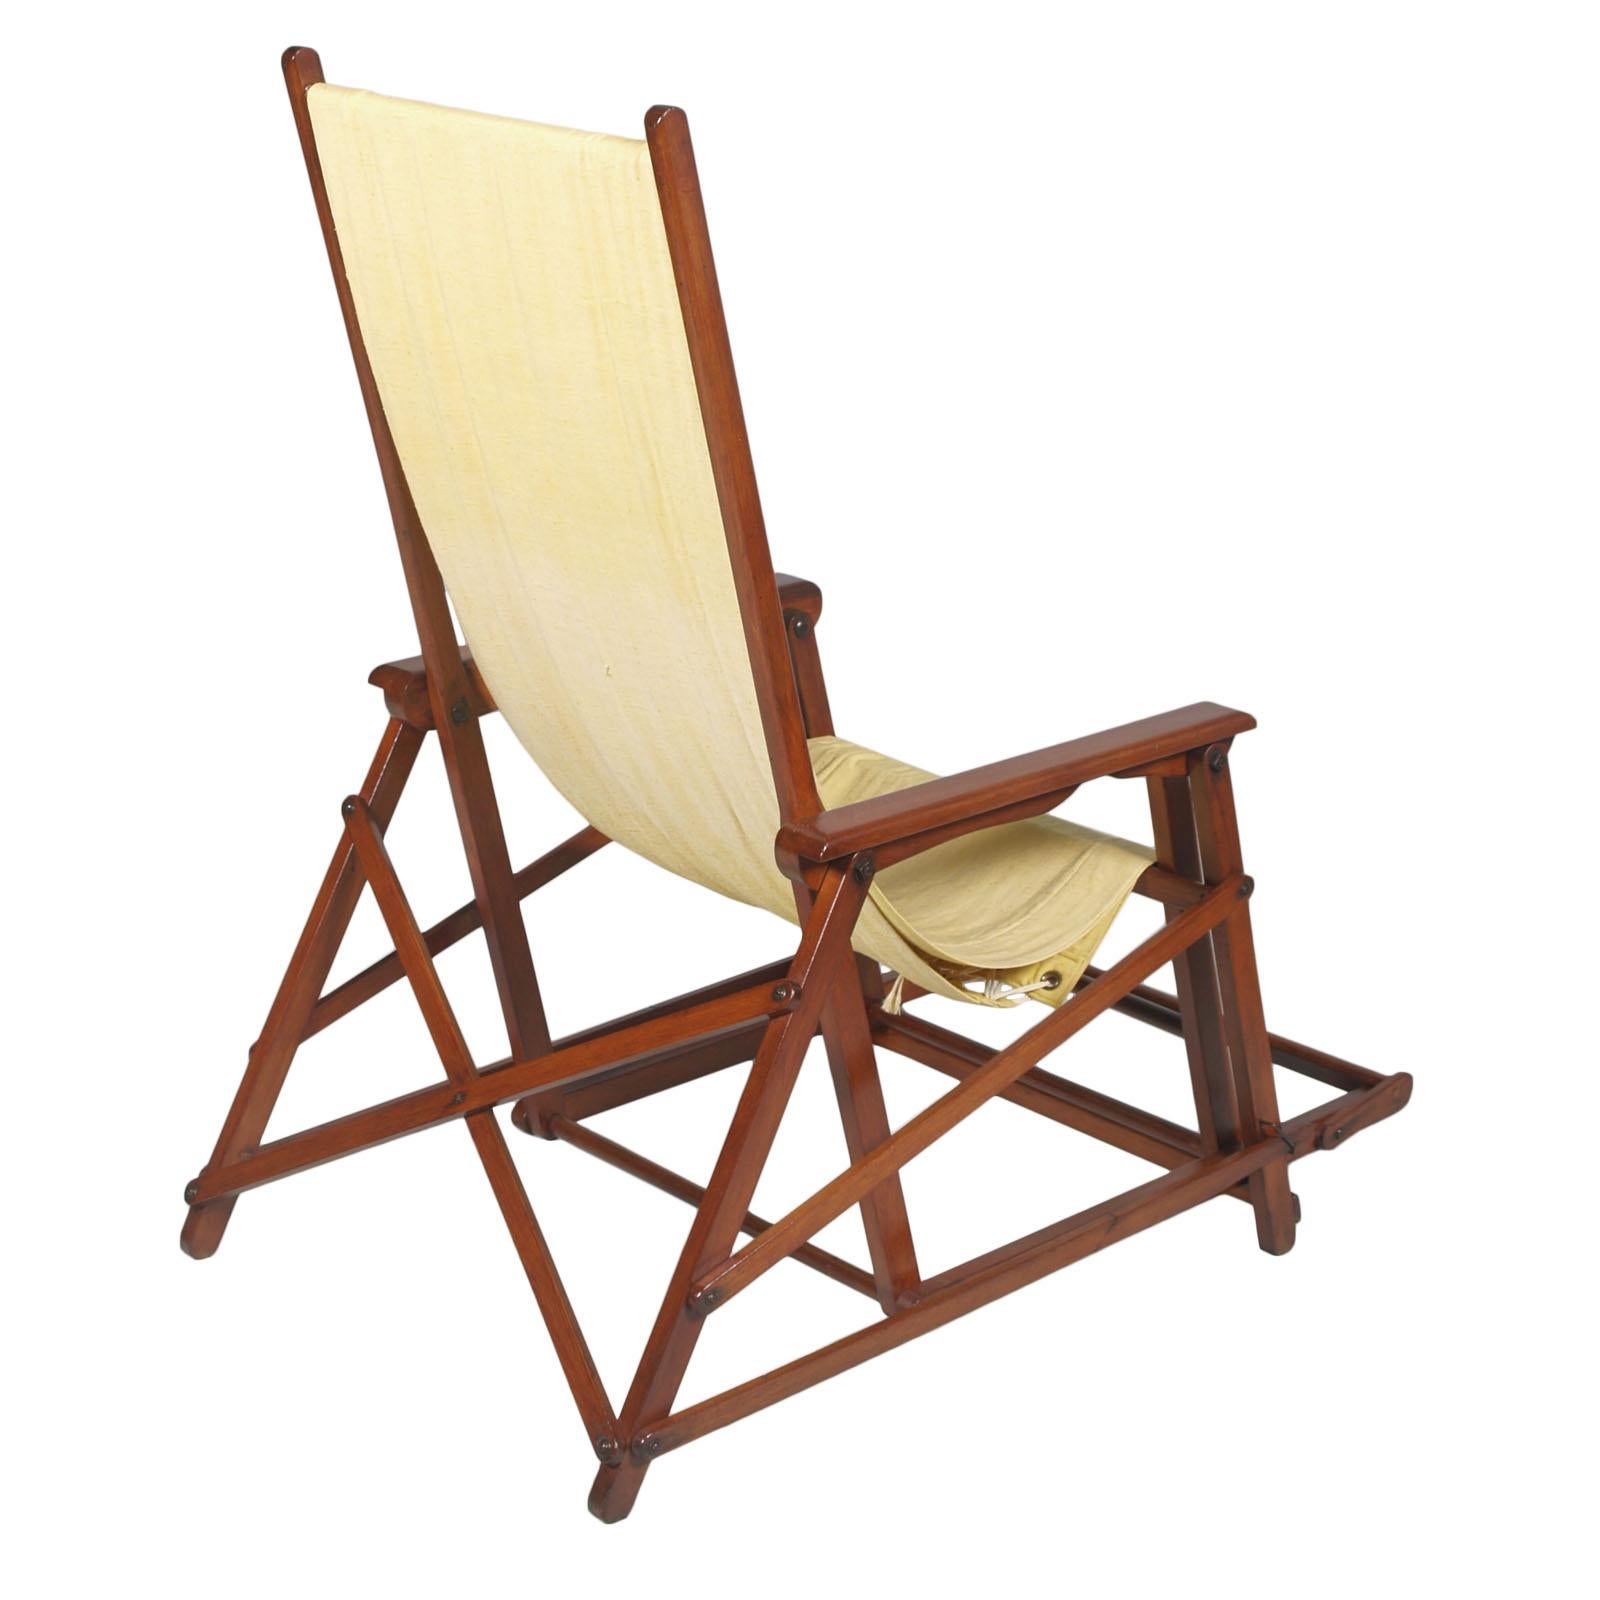 Polished Midcentury French Folding Canvas Long Chair, Clairitex Chaise Long de Paquebot